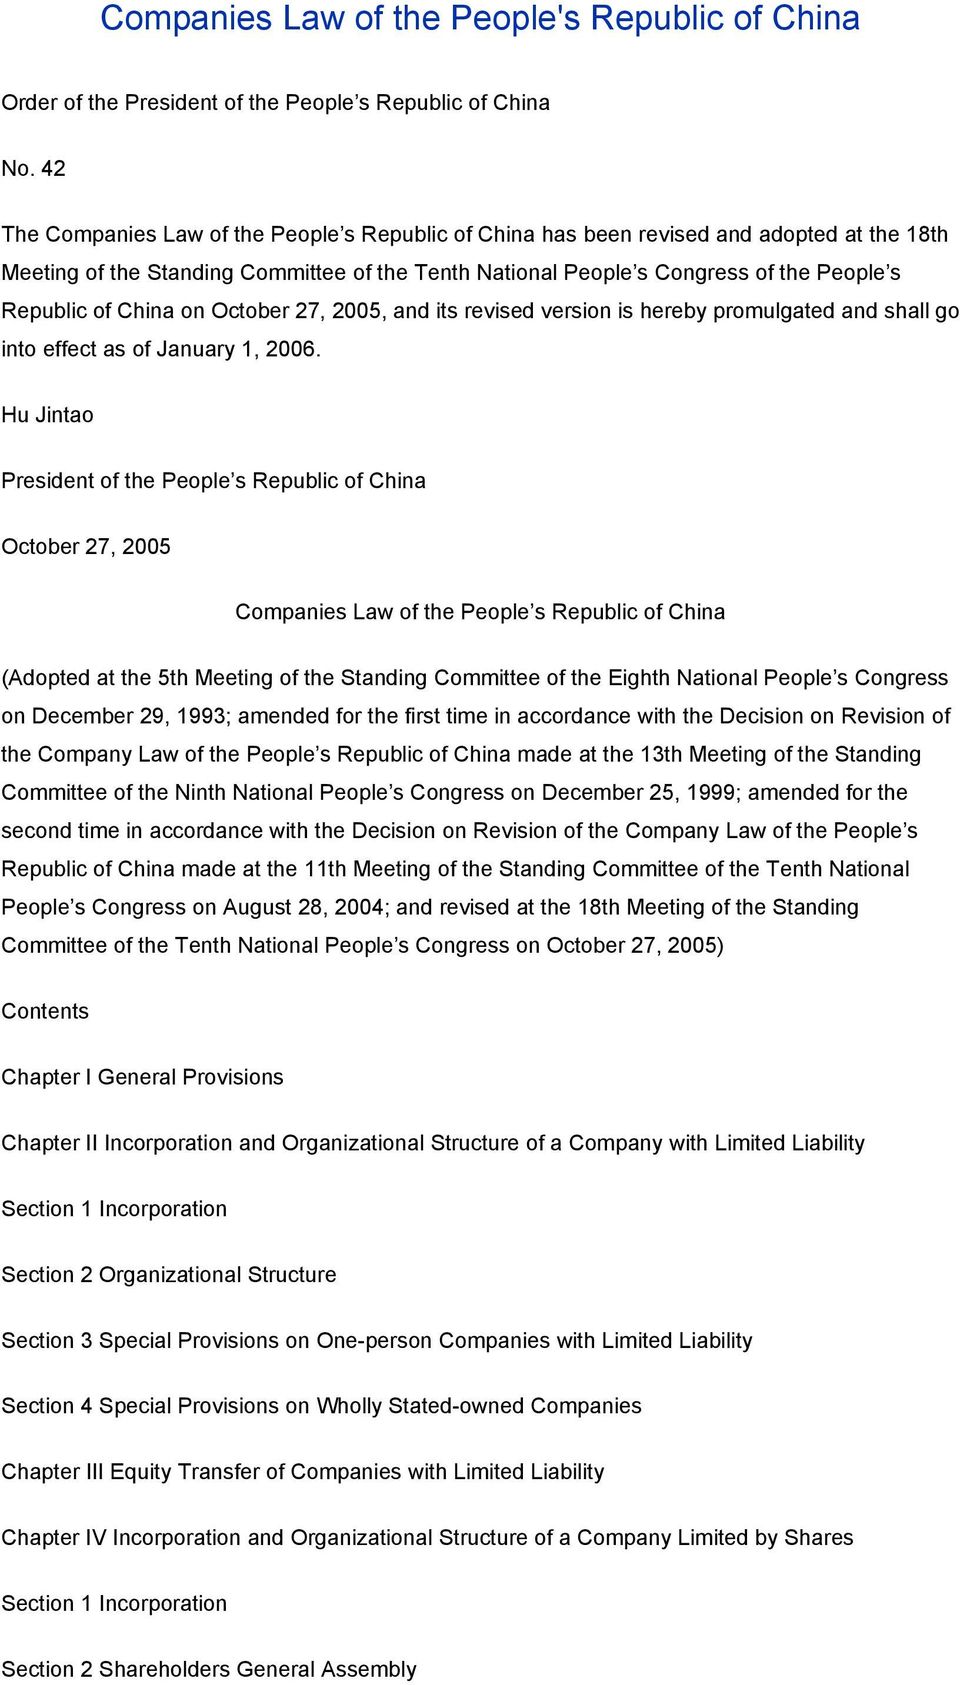 China on October 27, 2005, and its revised version is hereby promulgated and shall go into effect as of January 1, 2006.